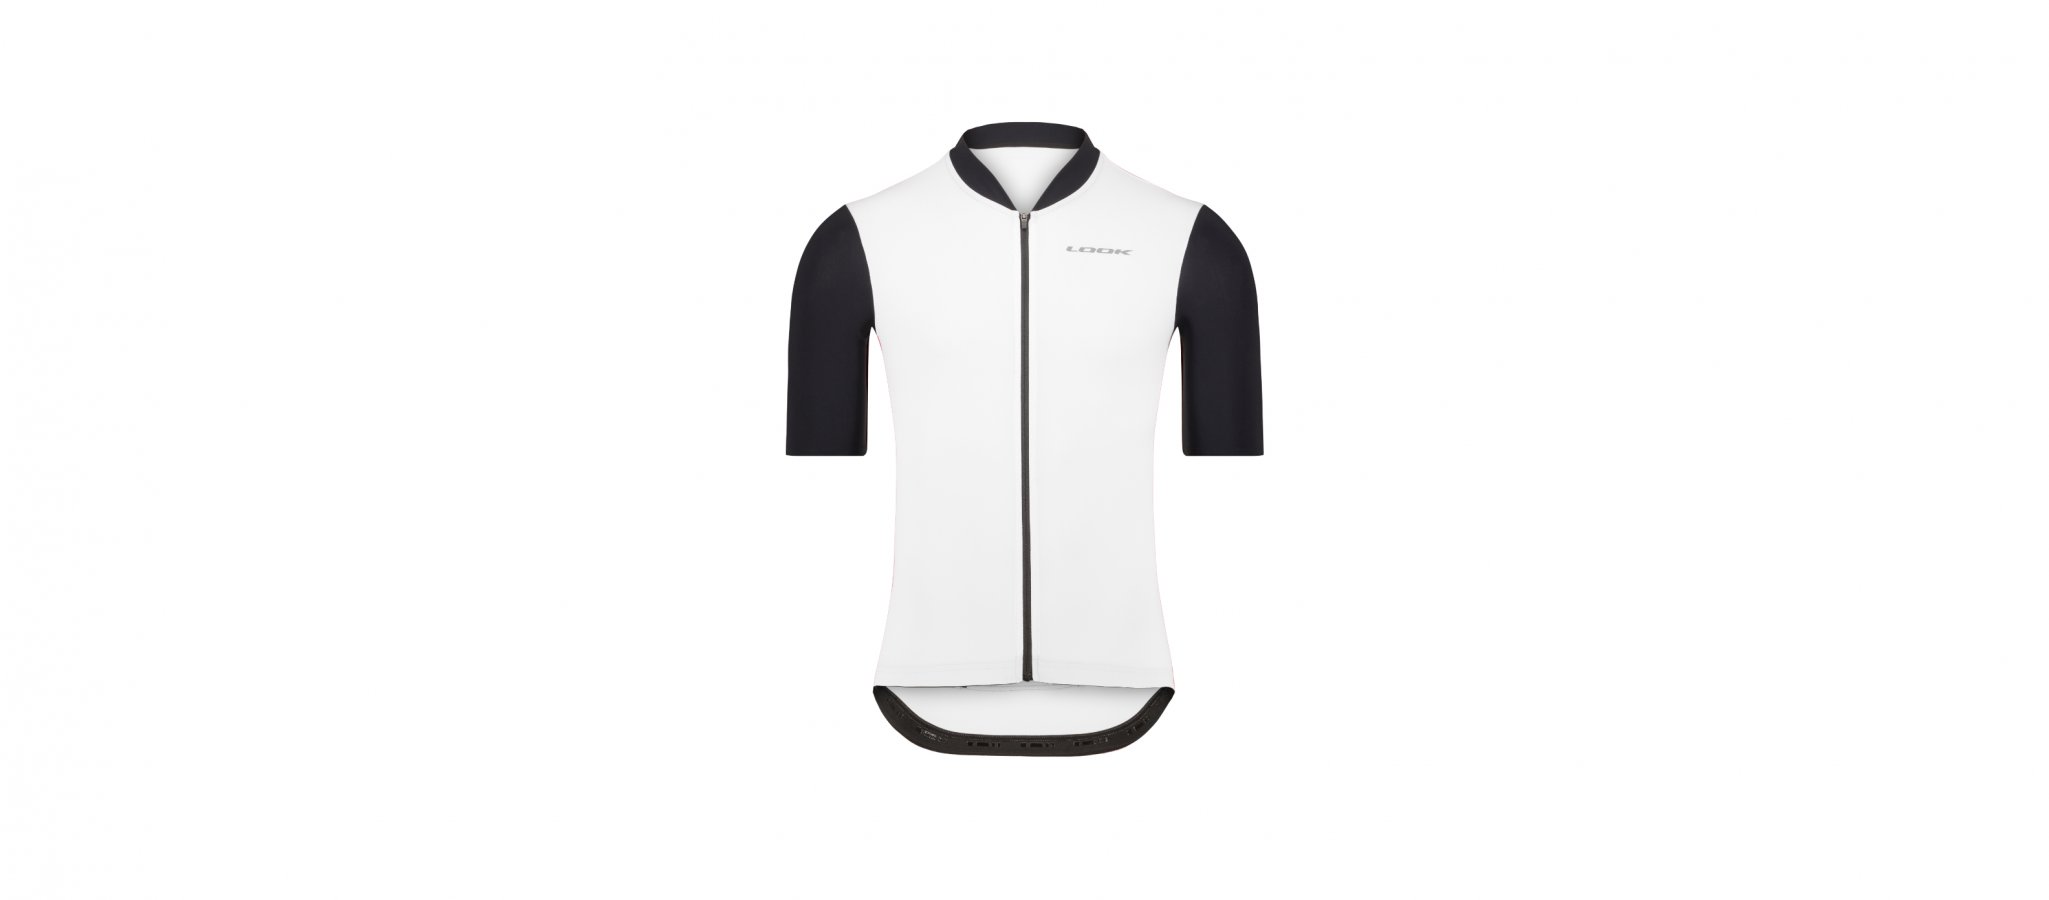 jersey-purist-essential-white-black-front